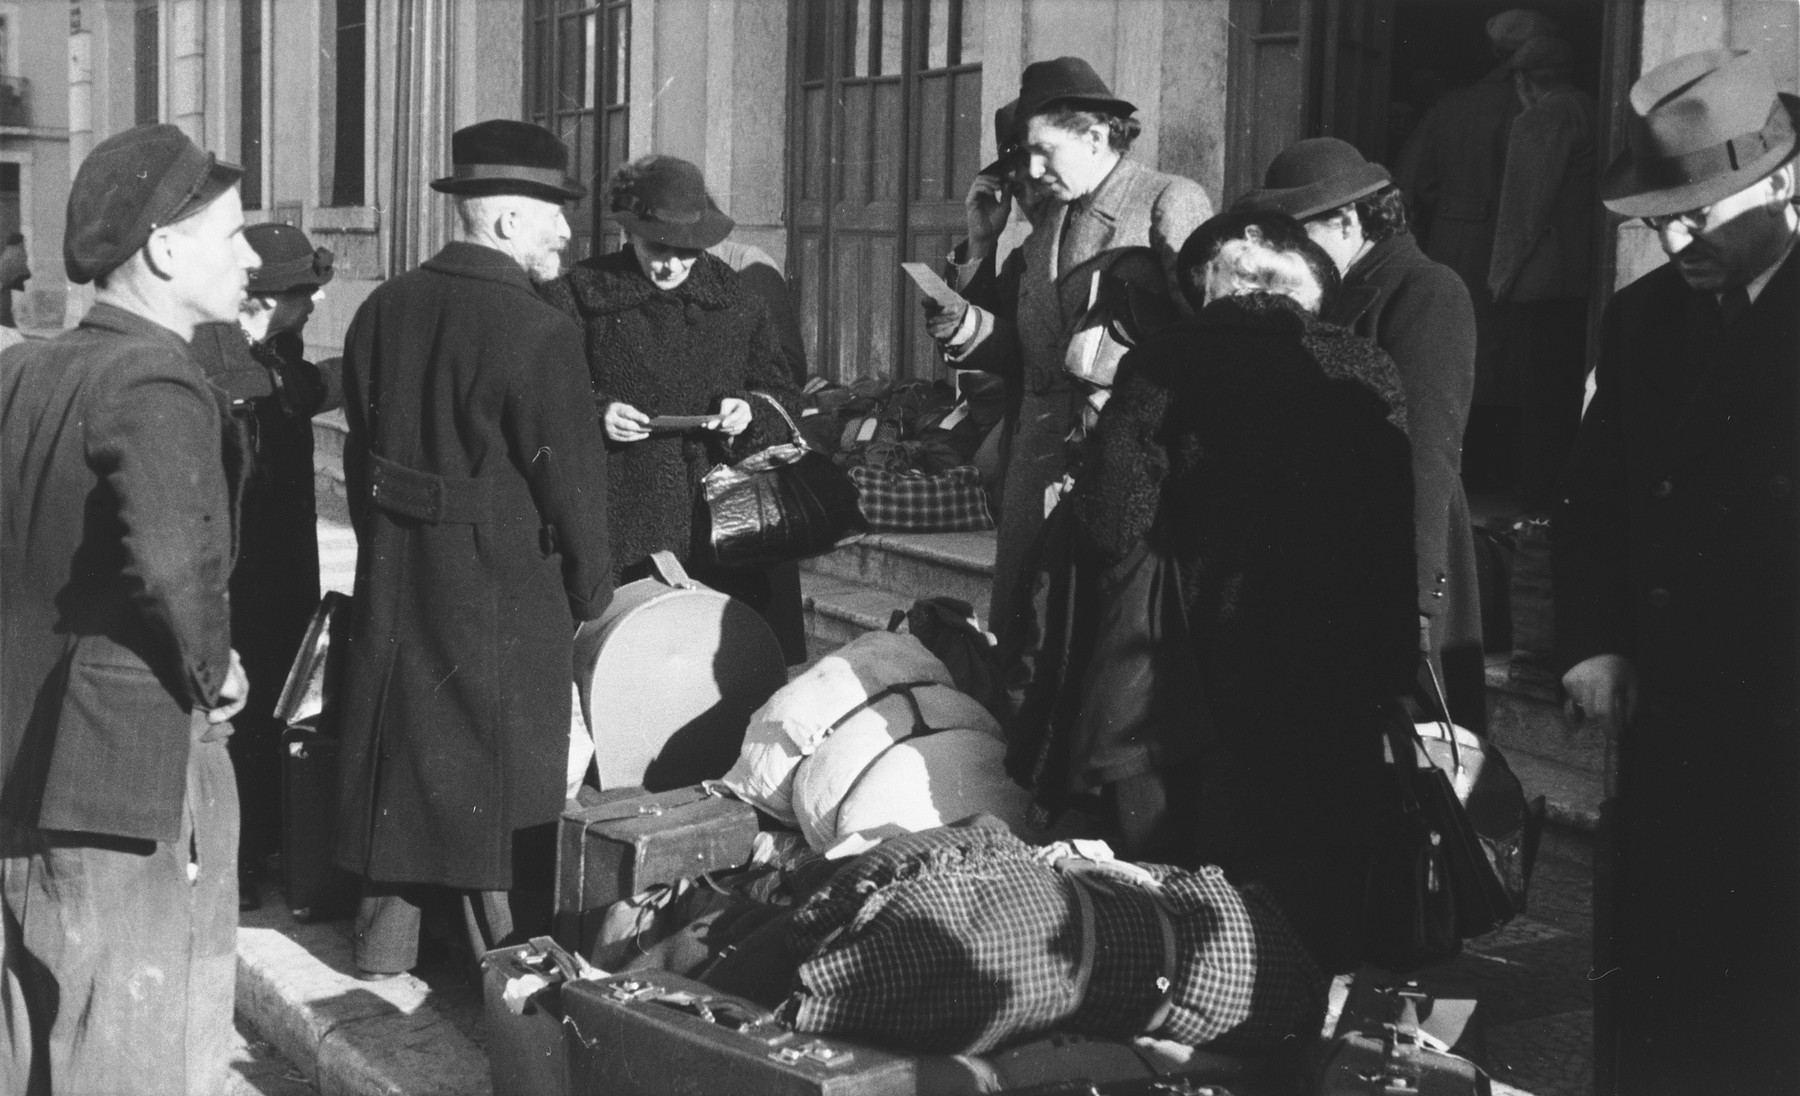 A group of Jewish refugees who have just arrived in Lisbon wait with their luggage in front of the St. Appolonia train station.